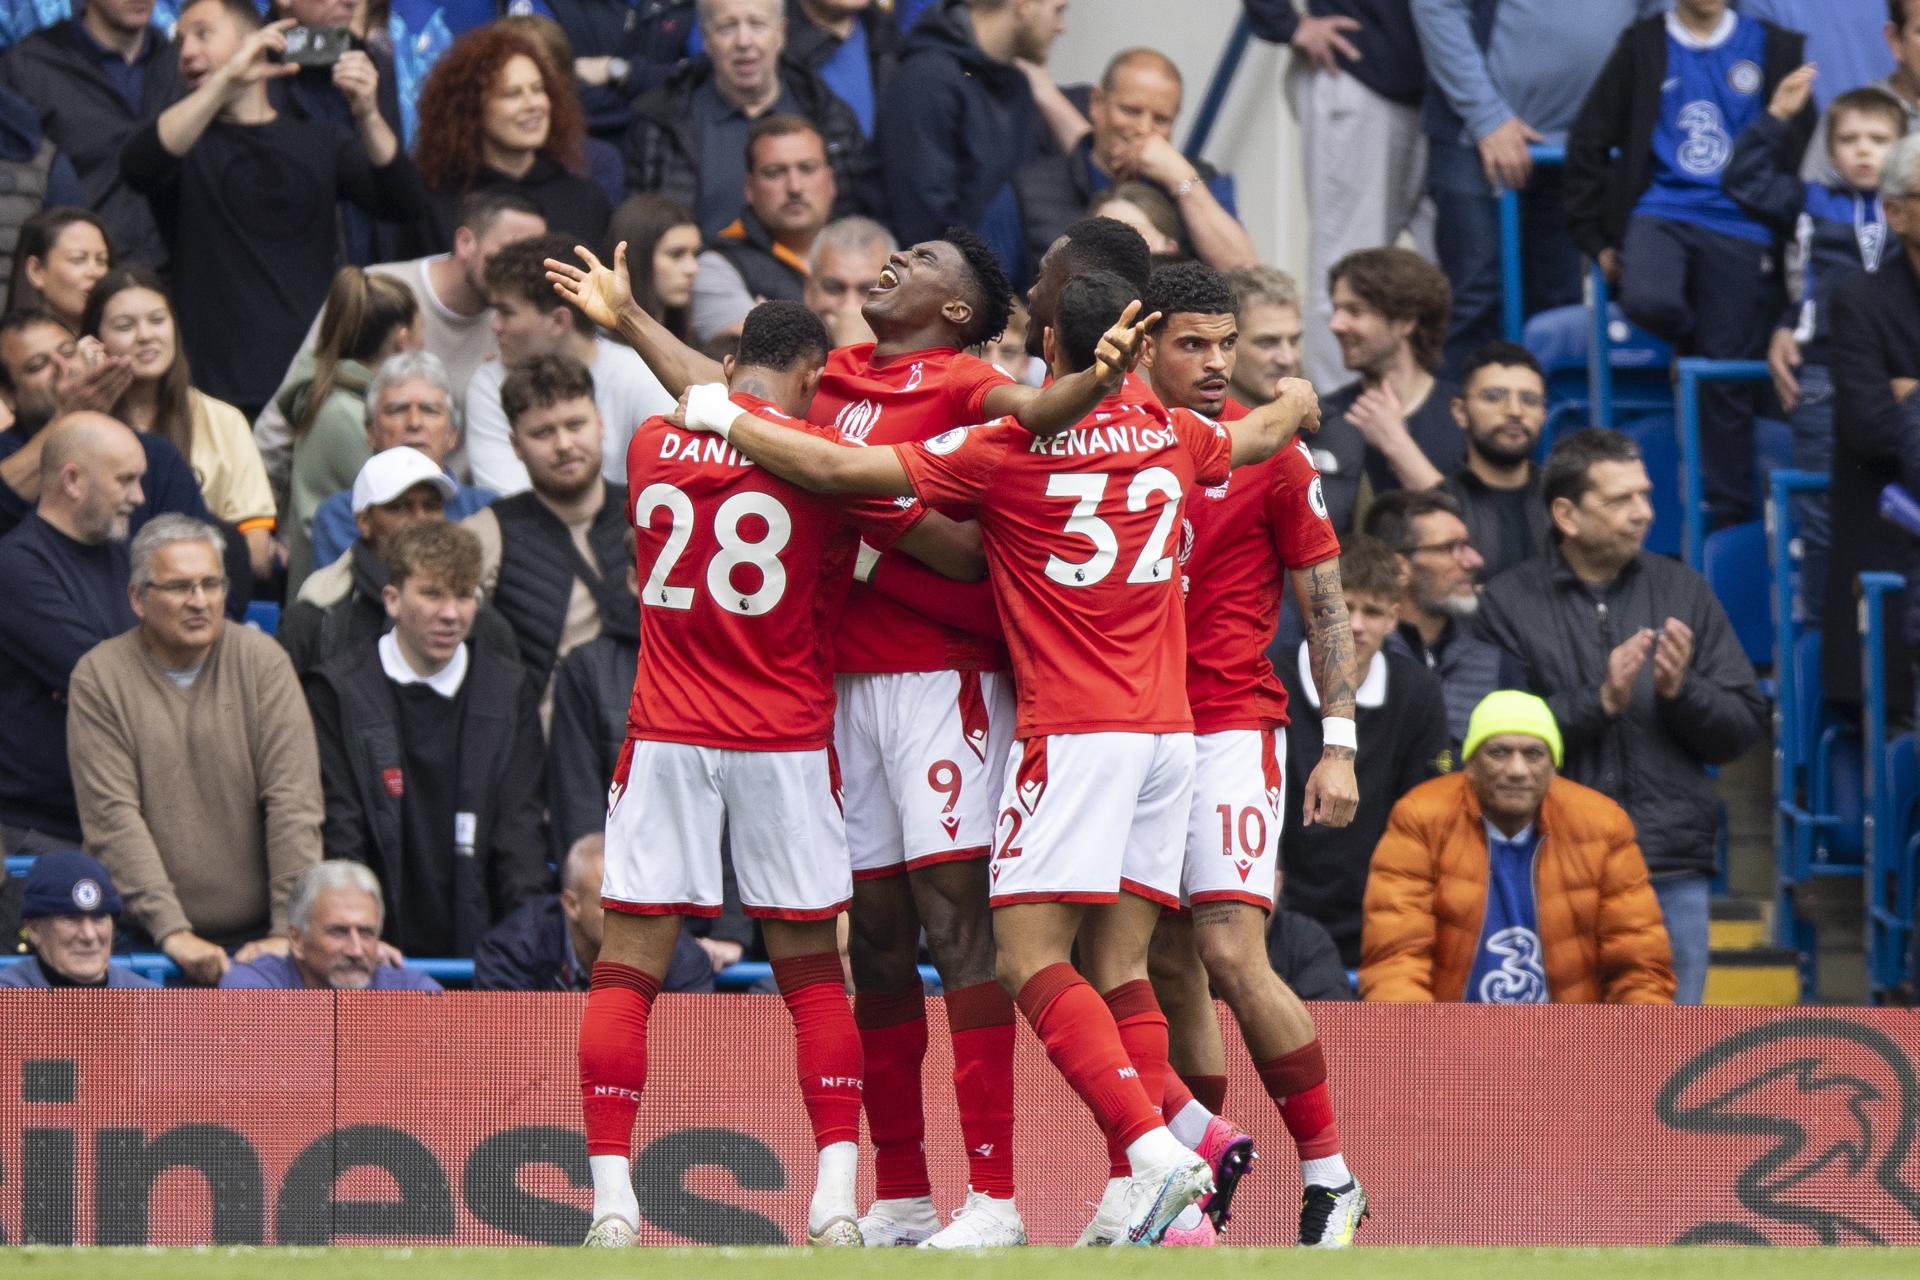 Nottingham Forest's Taiwo Awoniyi (C) celebrates with teammates after scoring against Arsenal during a Premier League match in Nottingham, England, on 20 May 2023. EFE/EPA/TOLGA AKMEN EDITORIAL USE ONLY. No use with unauthorized audio, video, data, fixture lists, club/league logos or 'live' services. Online in-match use limited to 120 images, no video emulation. No use in betting, games or single club/league/player publications.